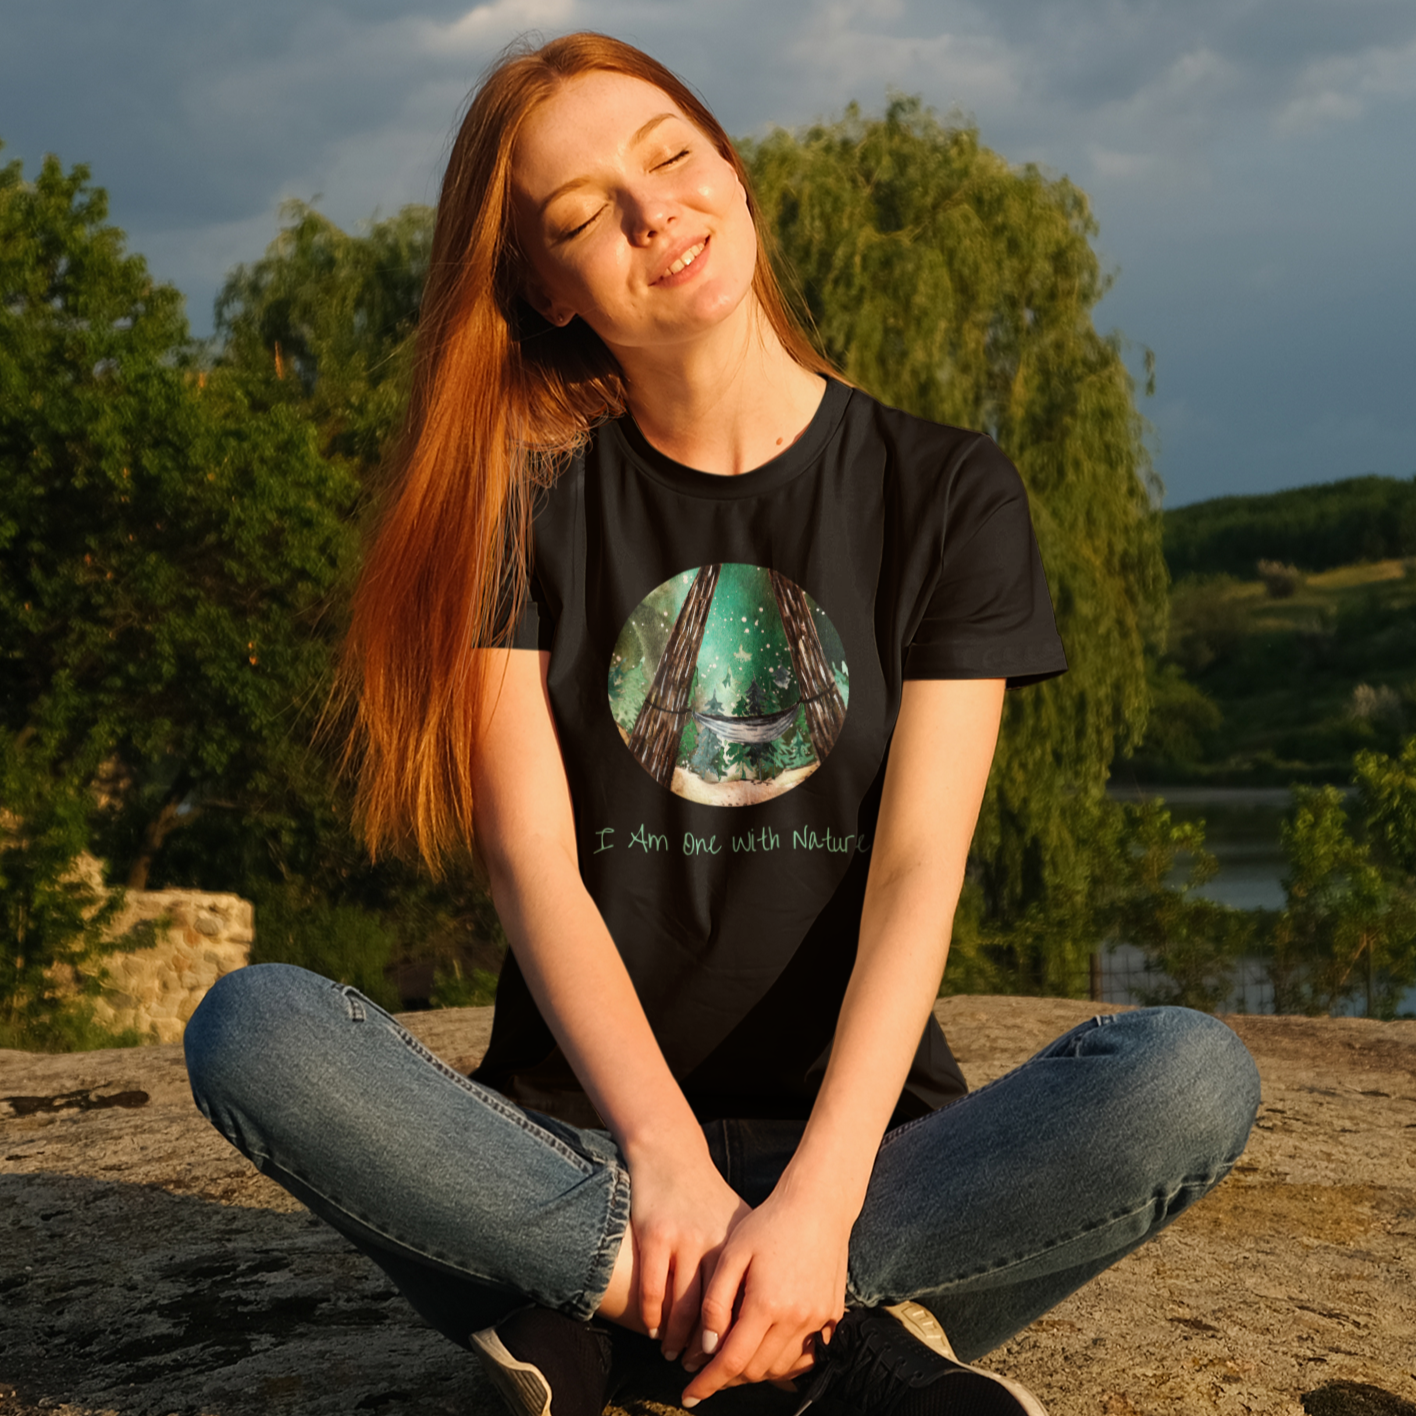 Story of Awakening Lifestyle Community Spirituality Relationships Love Light Meditation Oneness Earth Balance Healing Shop Store Charity Tree Nature Read Write T shirt Tops Tees Clothing Women Horoscope Organic I Am One With Nature Quote